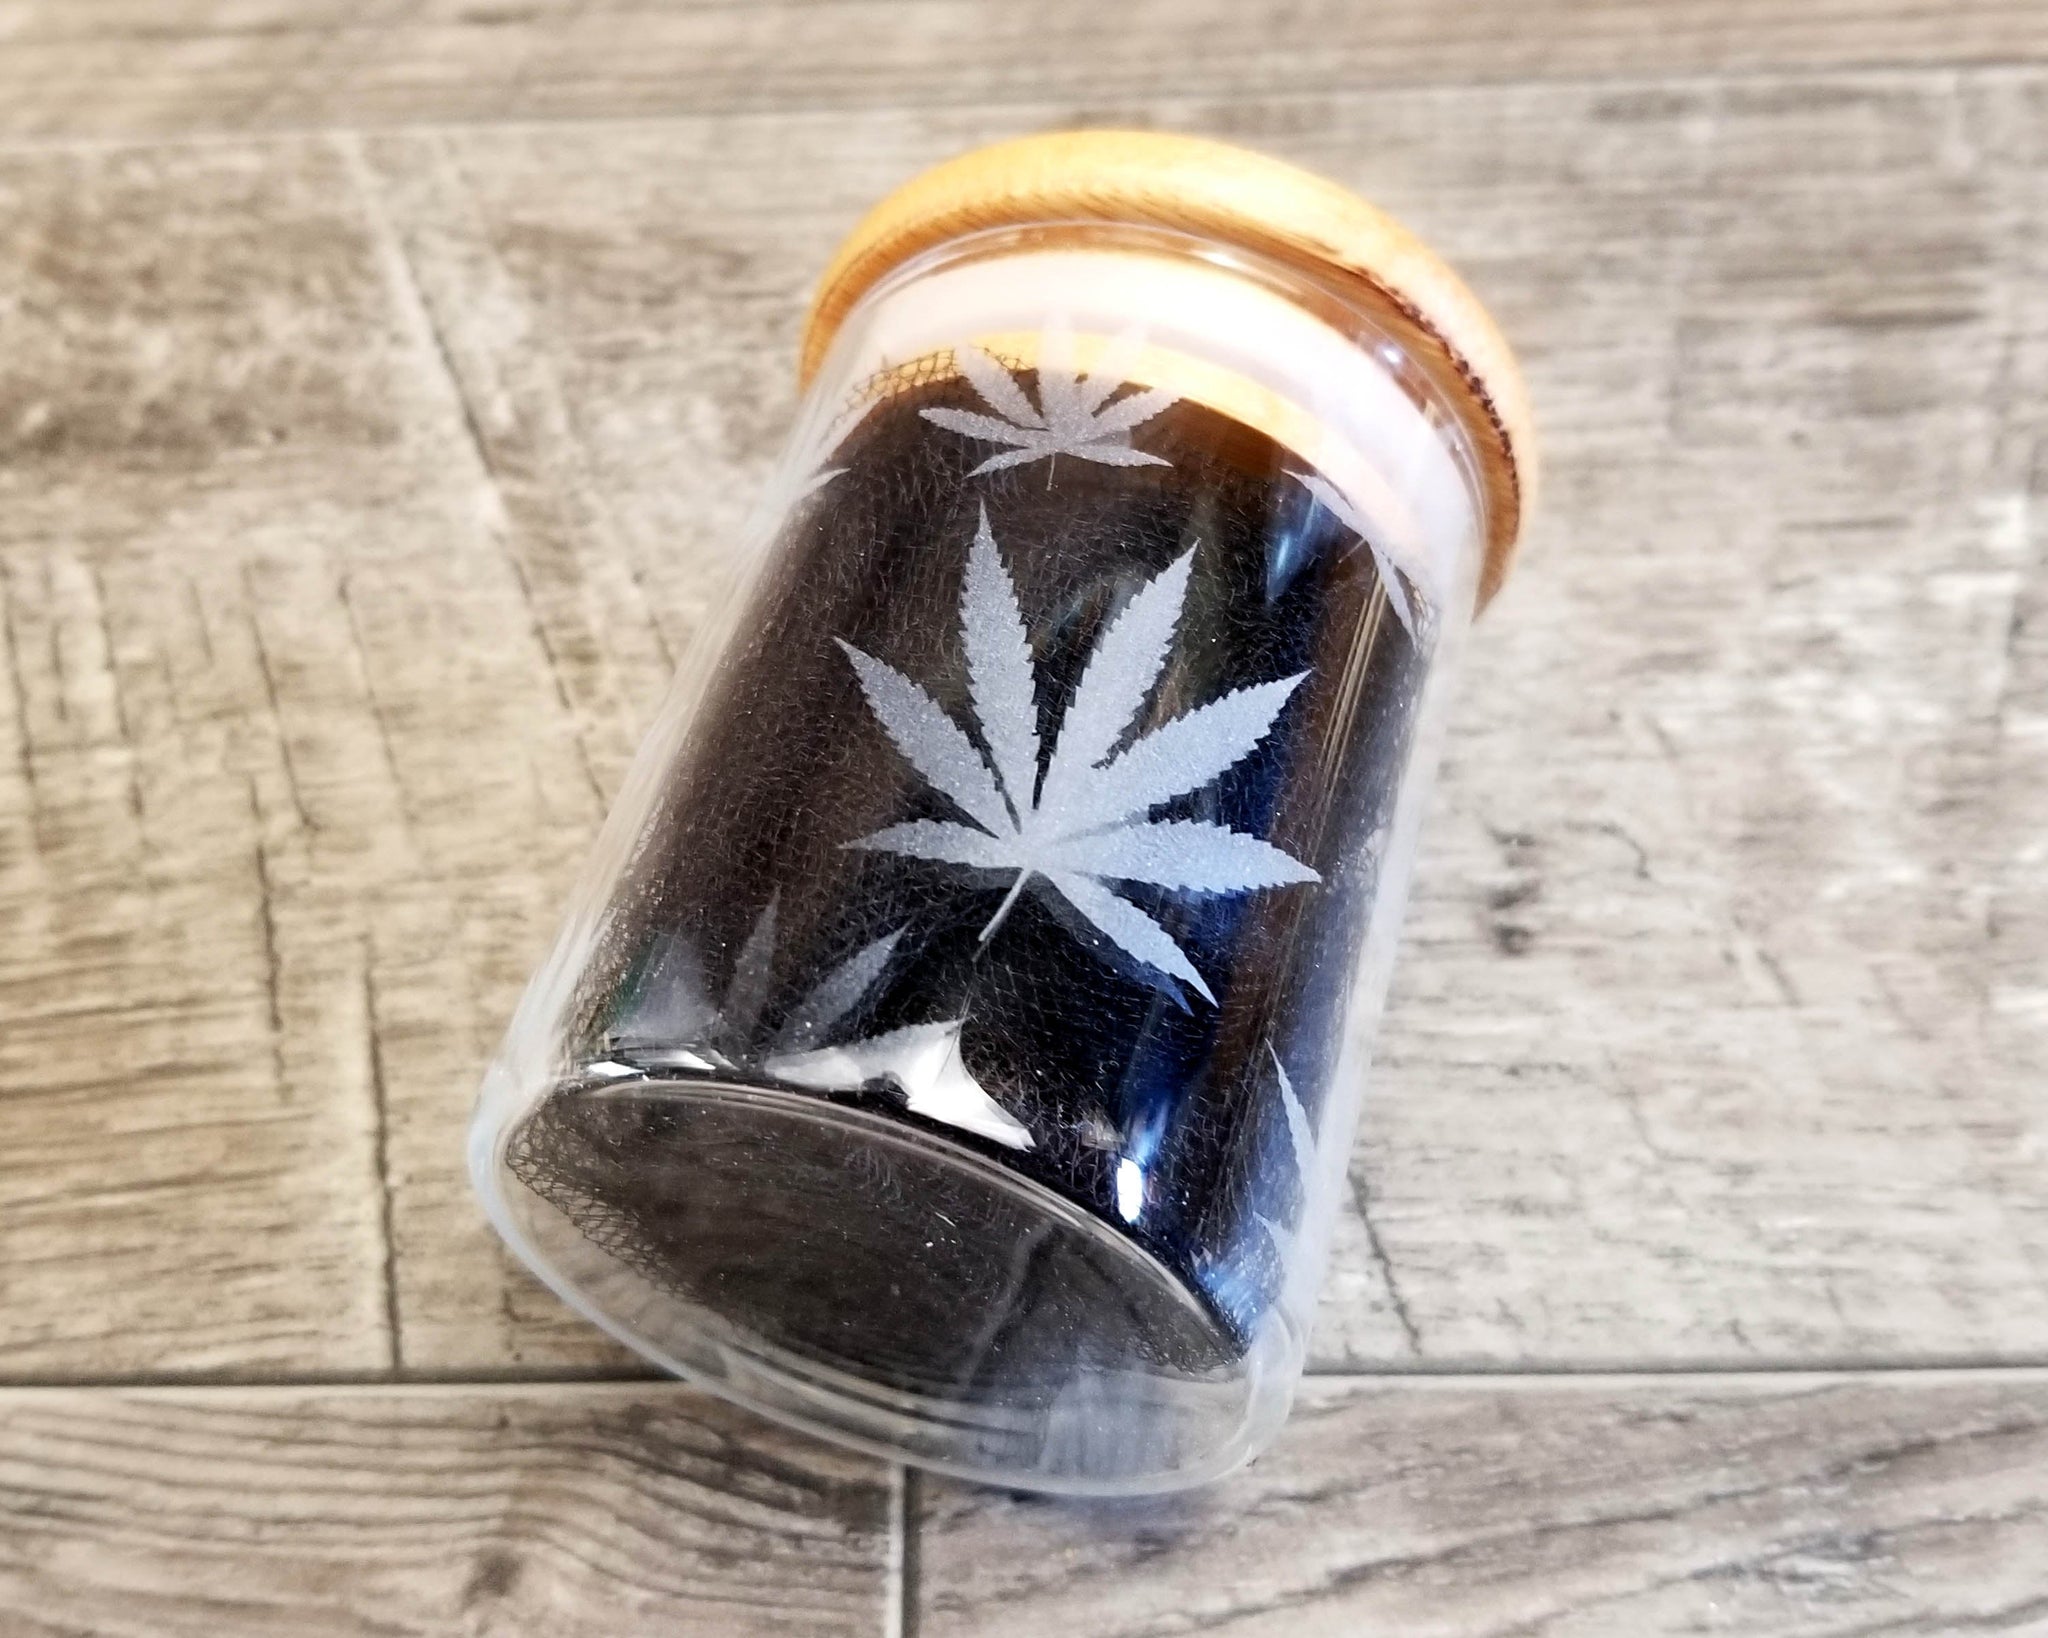 Airtight Glass Stash Jar 5 oz - Black Frosted with Green Leaves